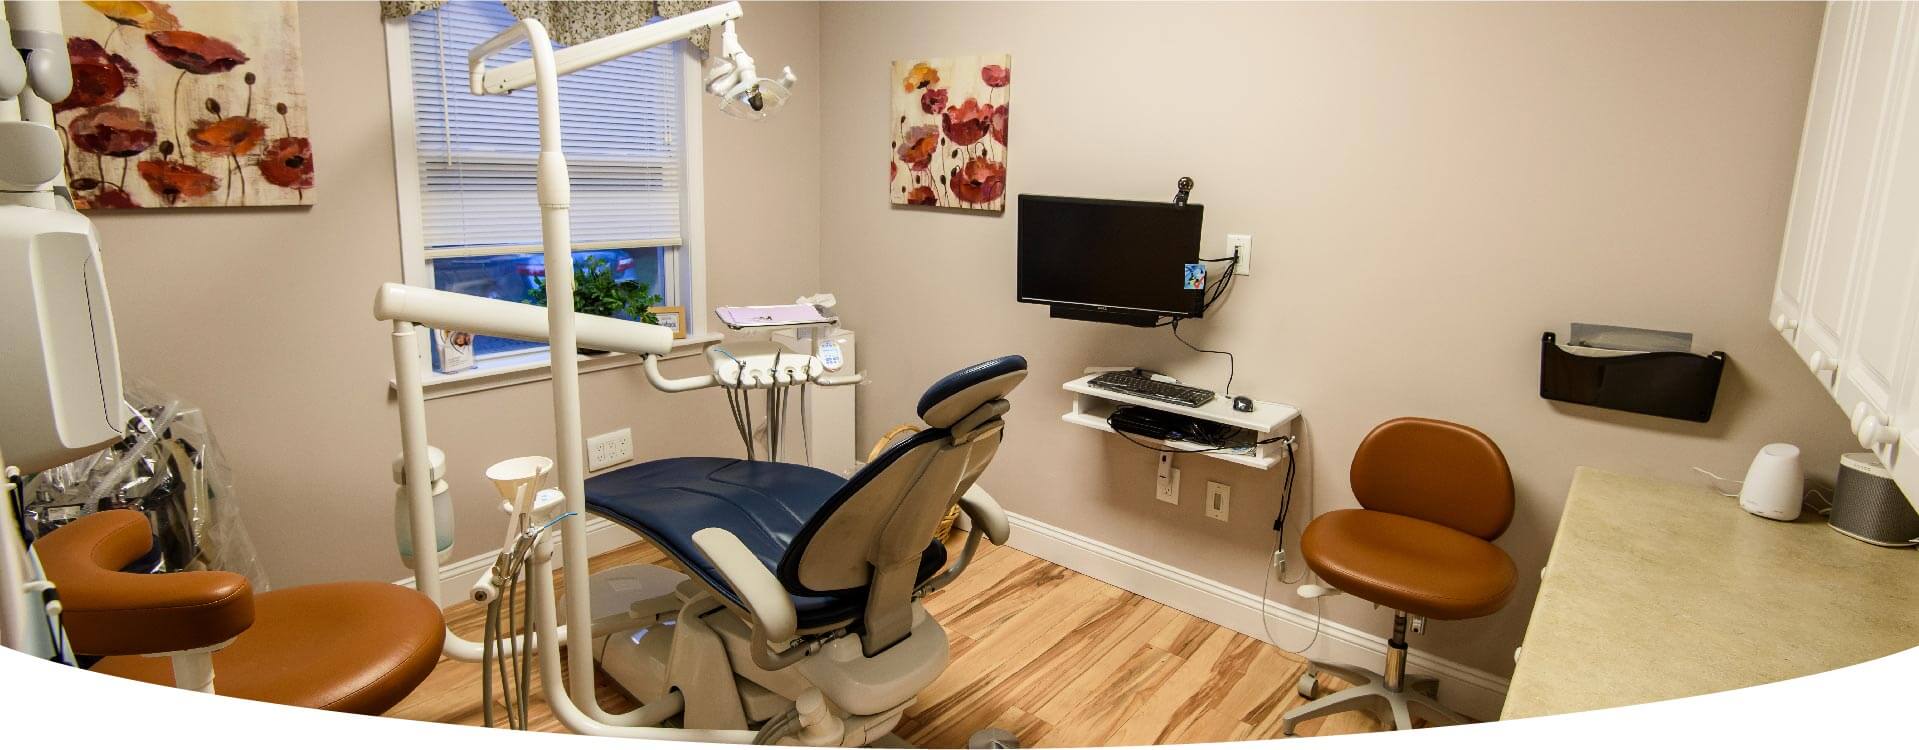 A Dentist's Chair in A Room